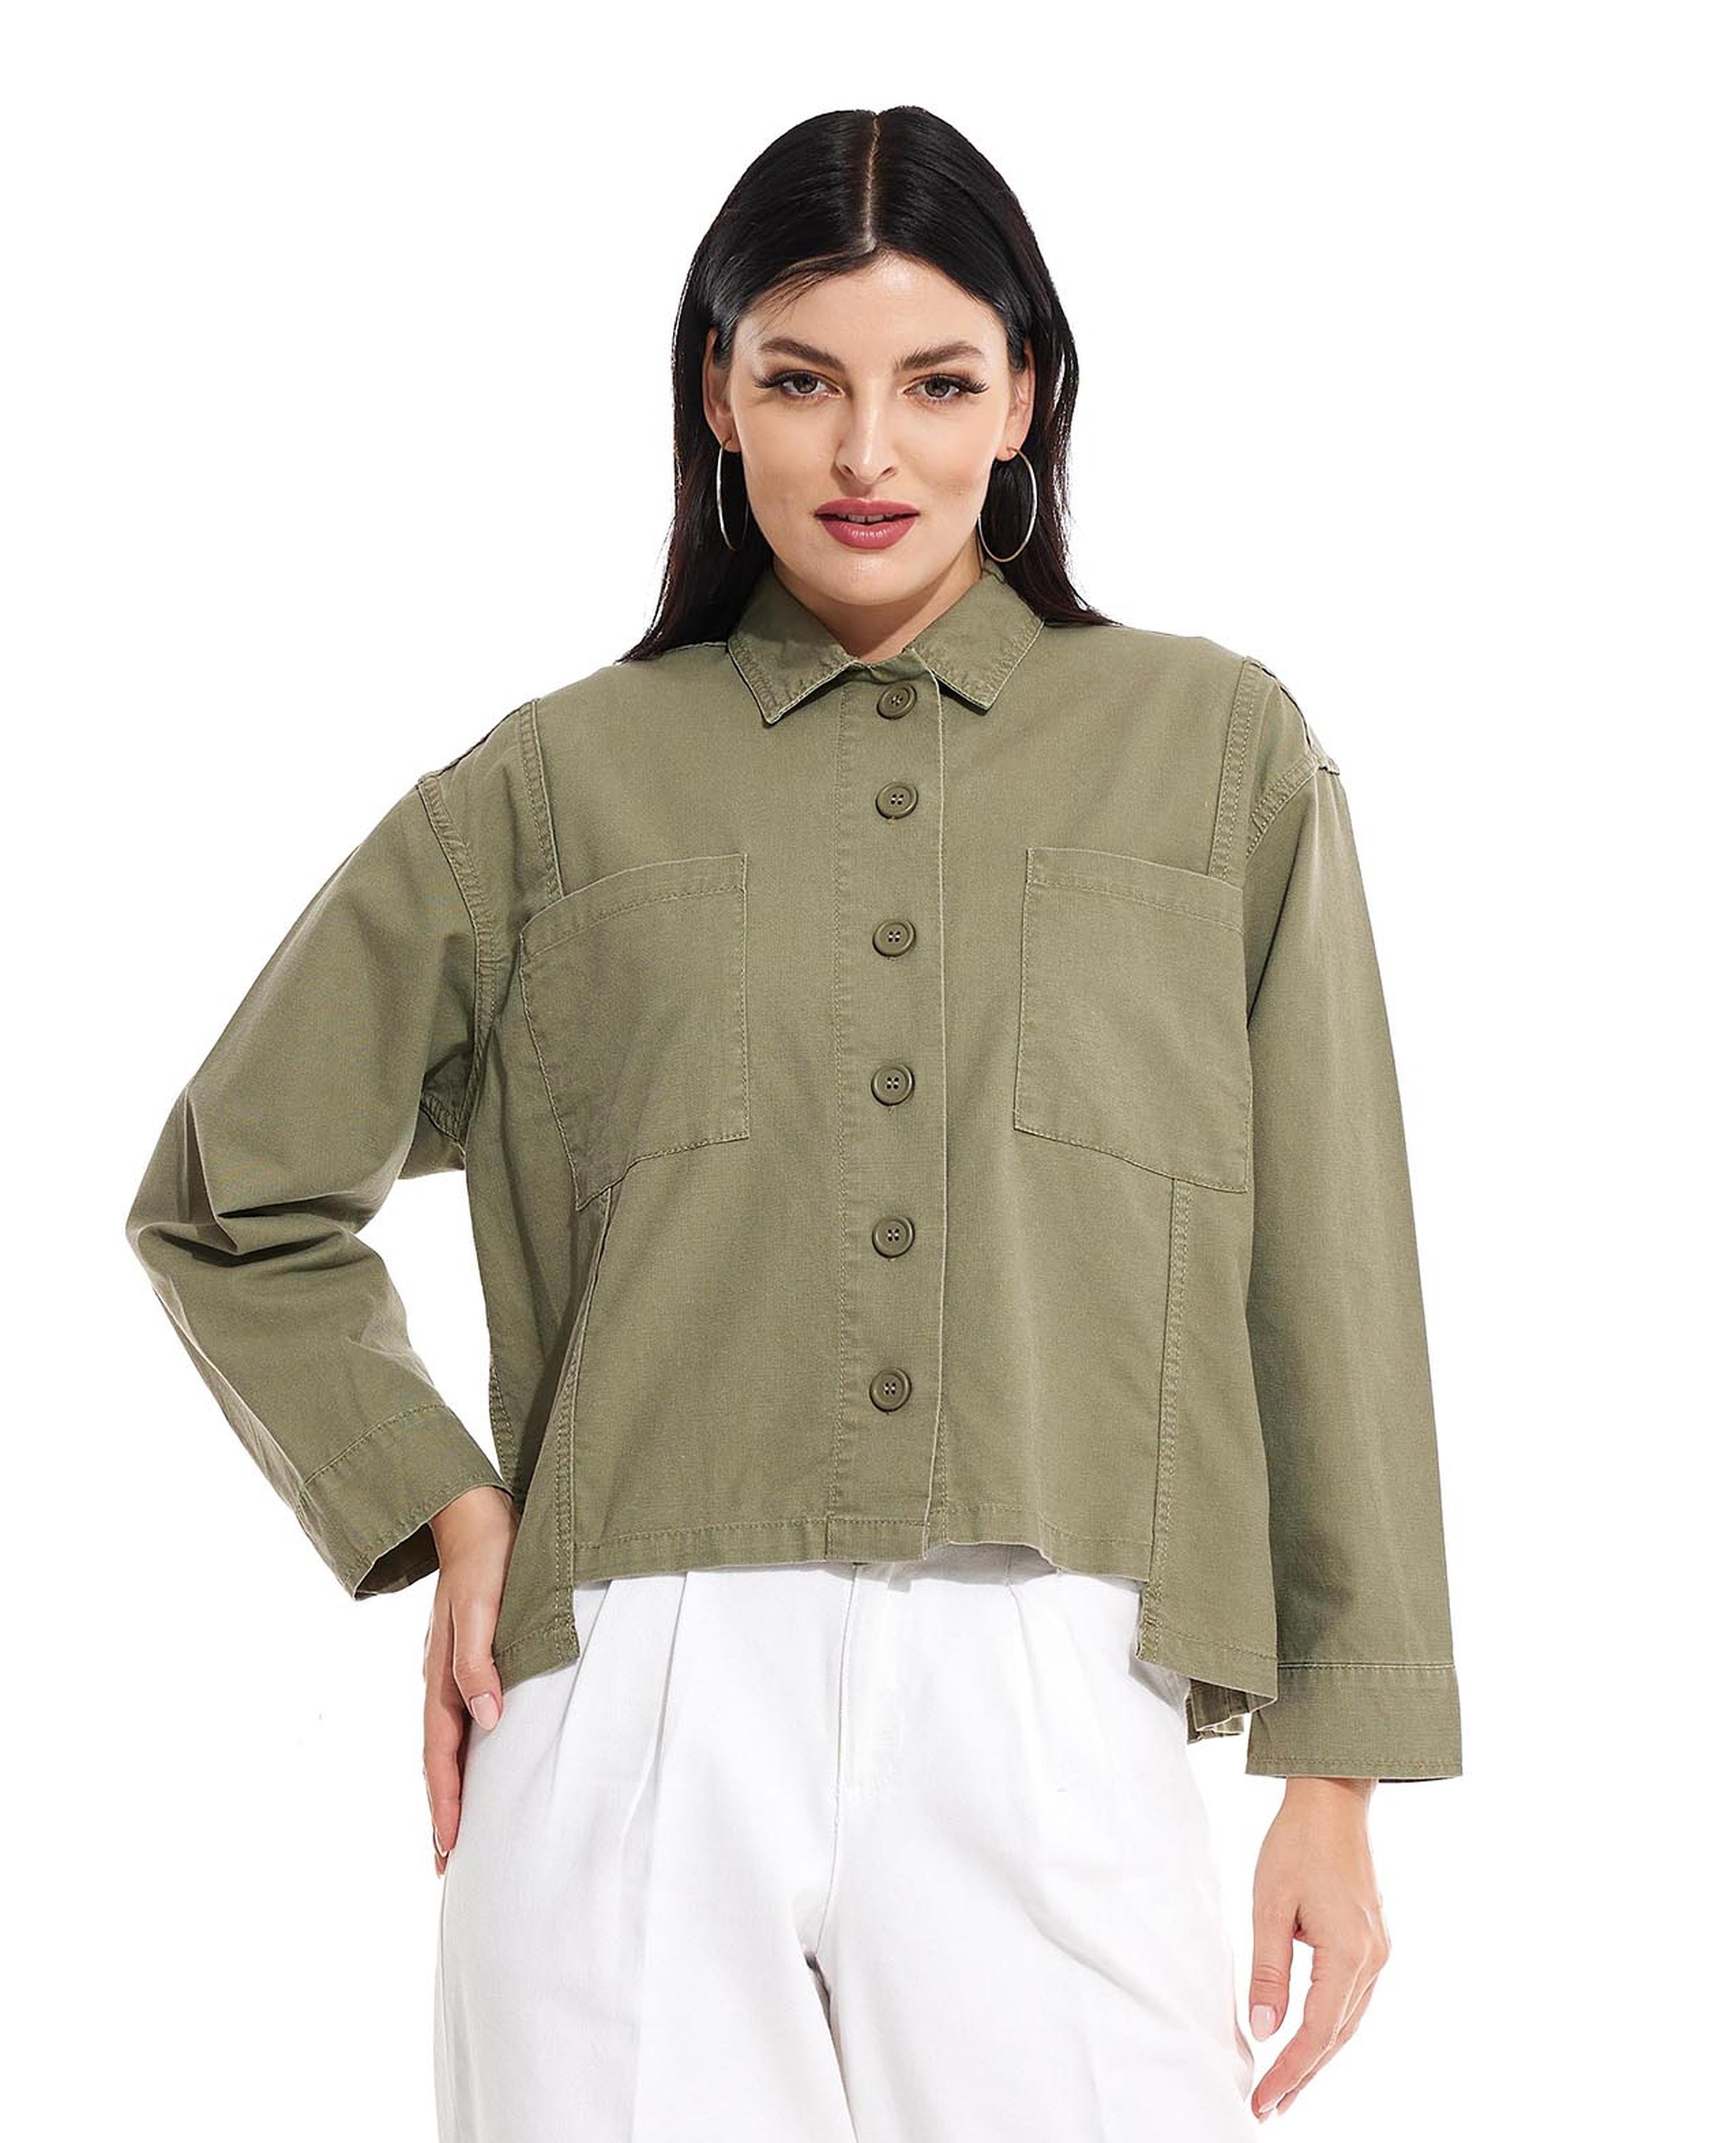 Solid Oversized Shirt with Classic Collar and Button Front